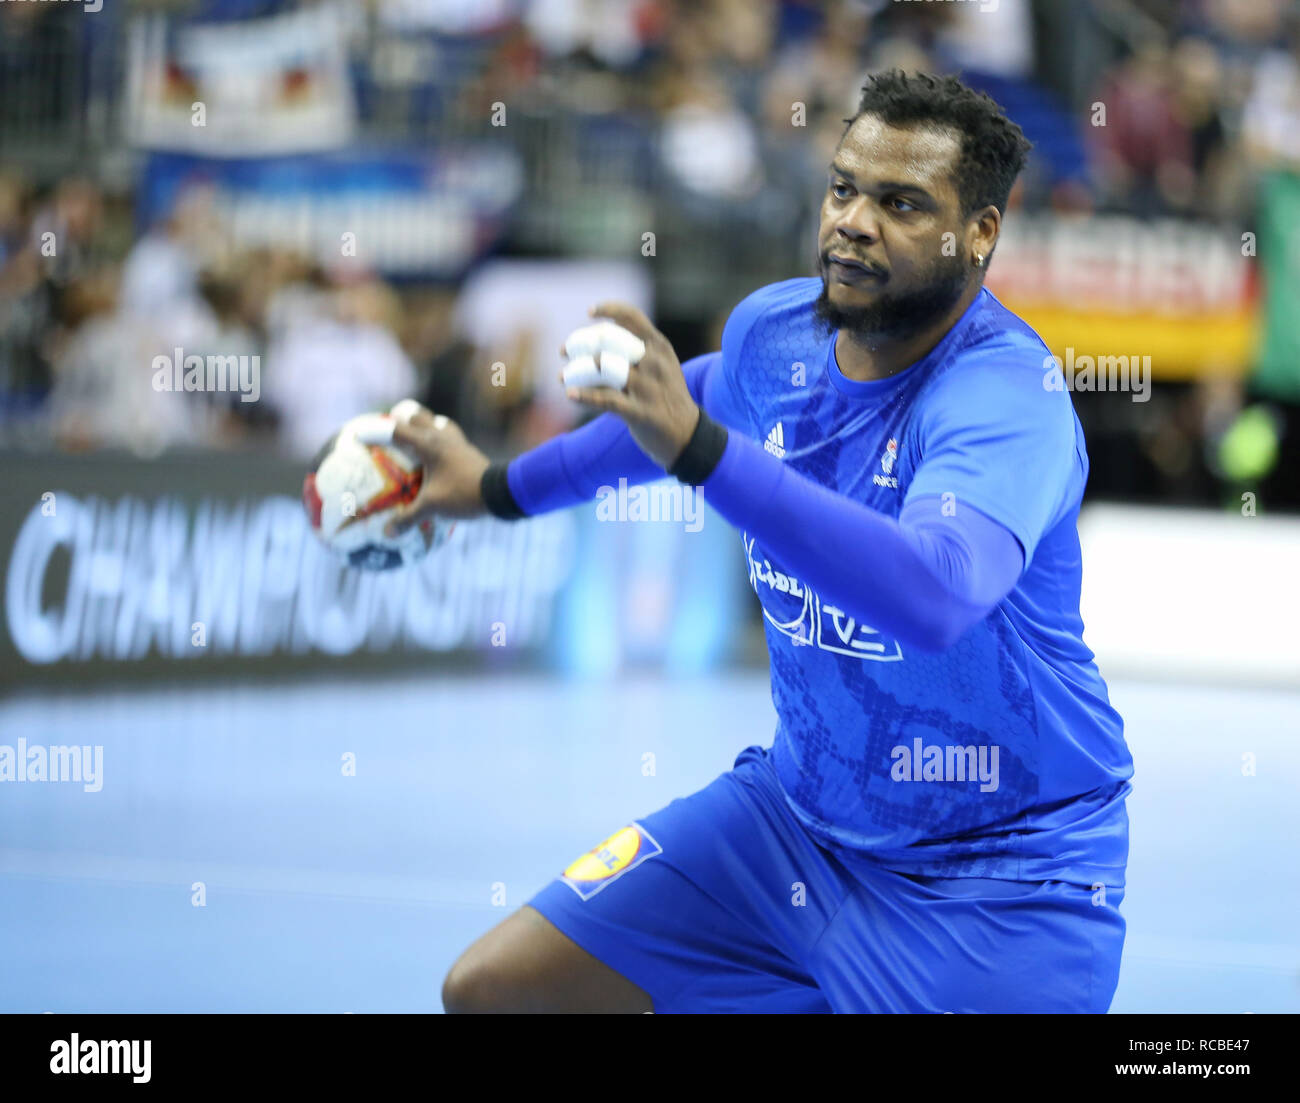 Berlin, Germany. 14th Jan, 2019. Handball IHF Men's World Championship: France pivot Cedric Sorhaindo during the warm-up before the game Credit: Mickael Chavet/Alamy Live News Stock Photo